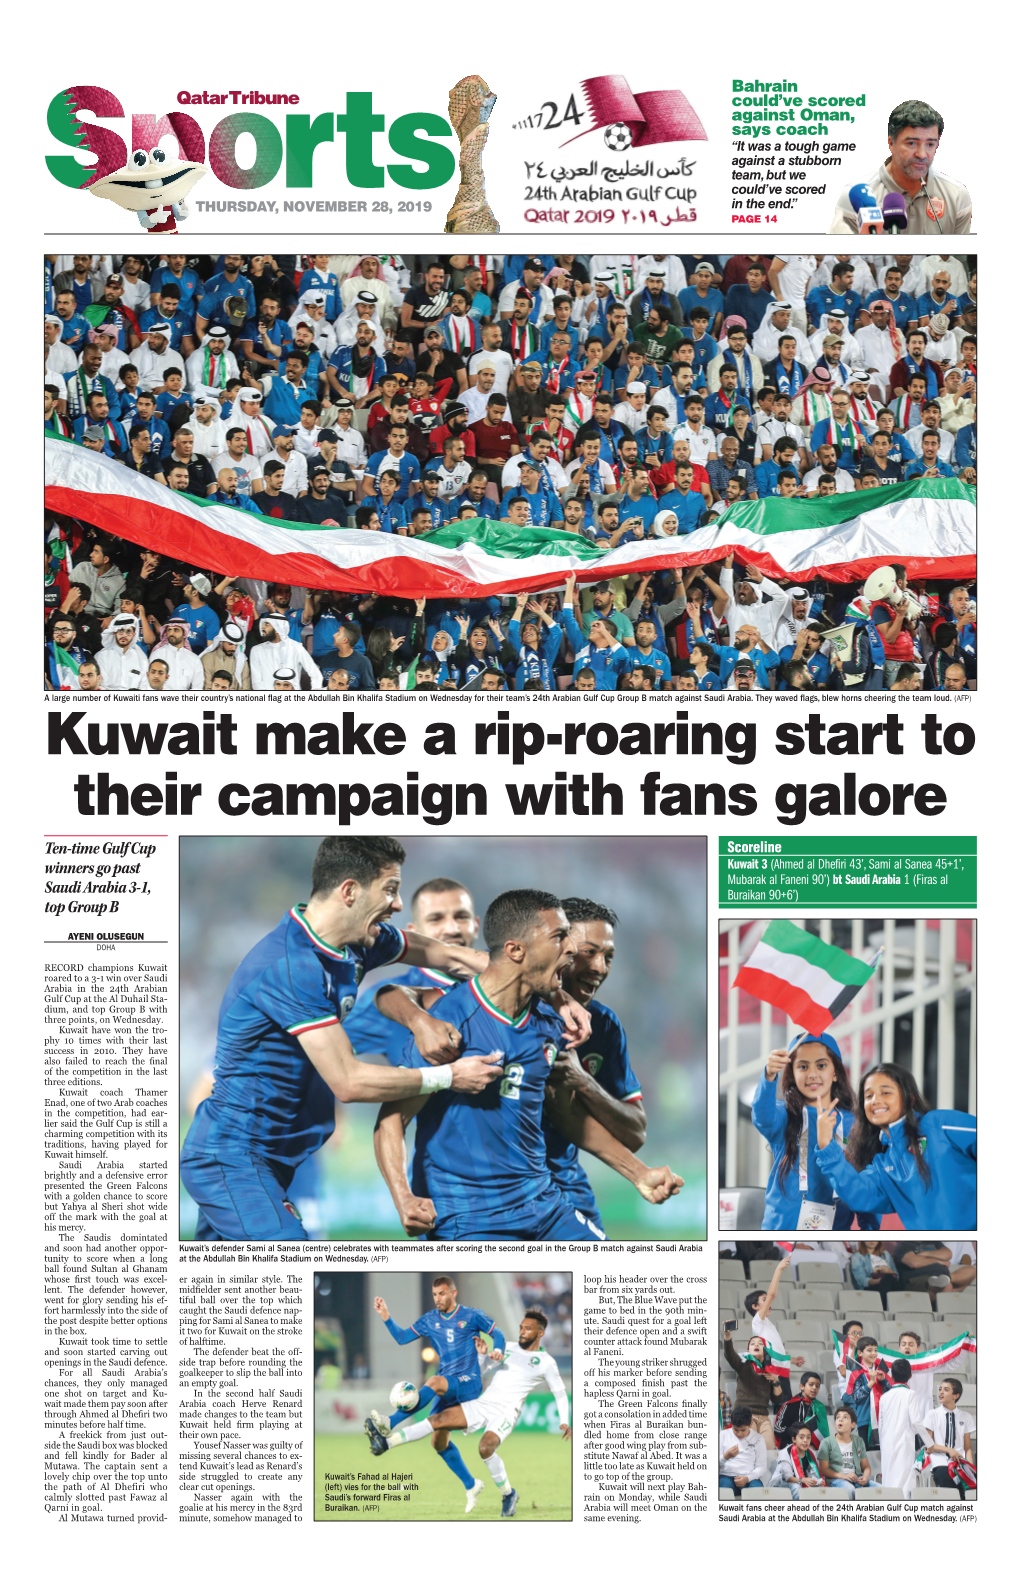 Kuwait Make a Rip-Roaring Start to Their Campaign with Fans Galore